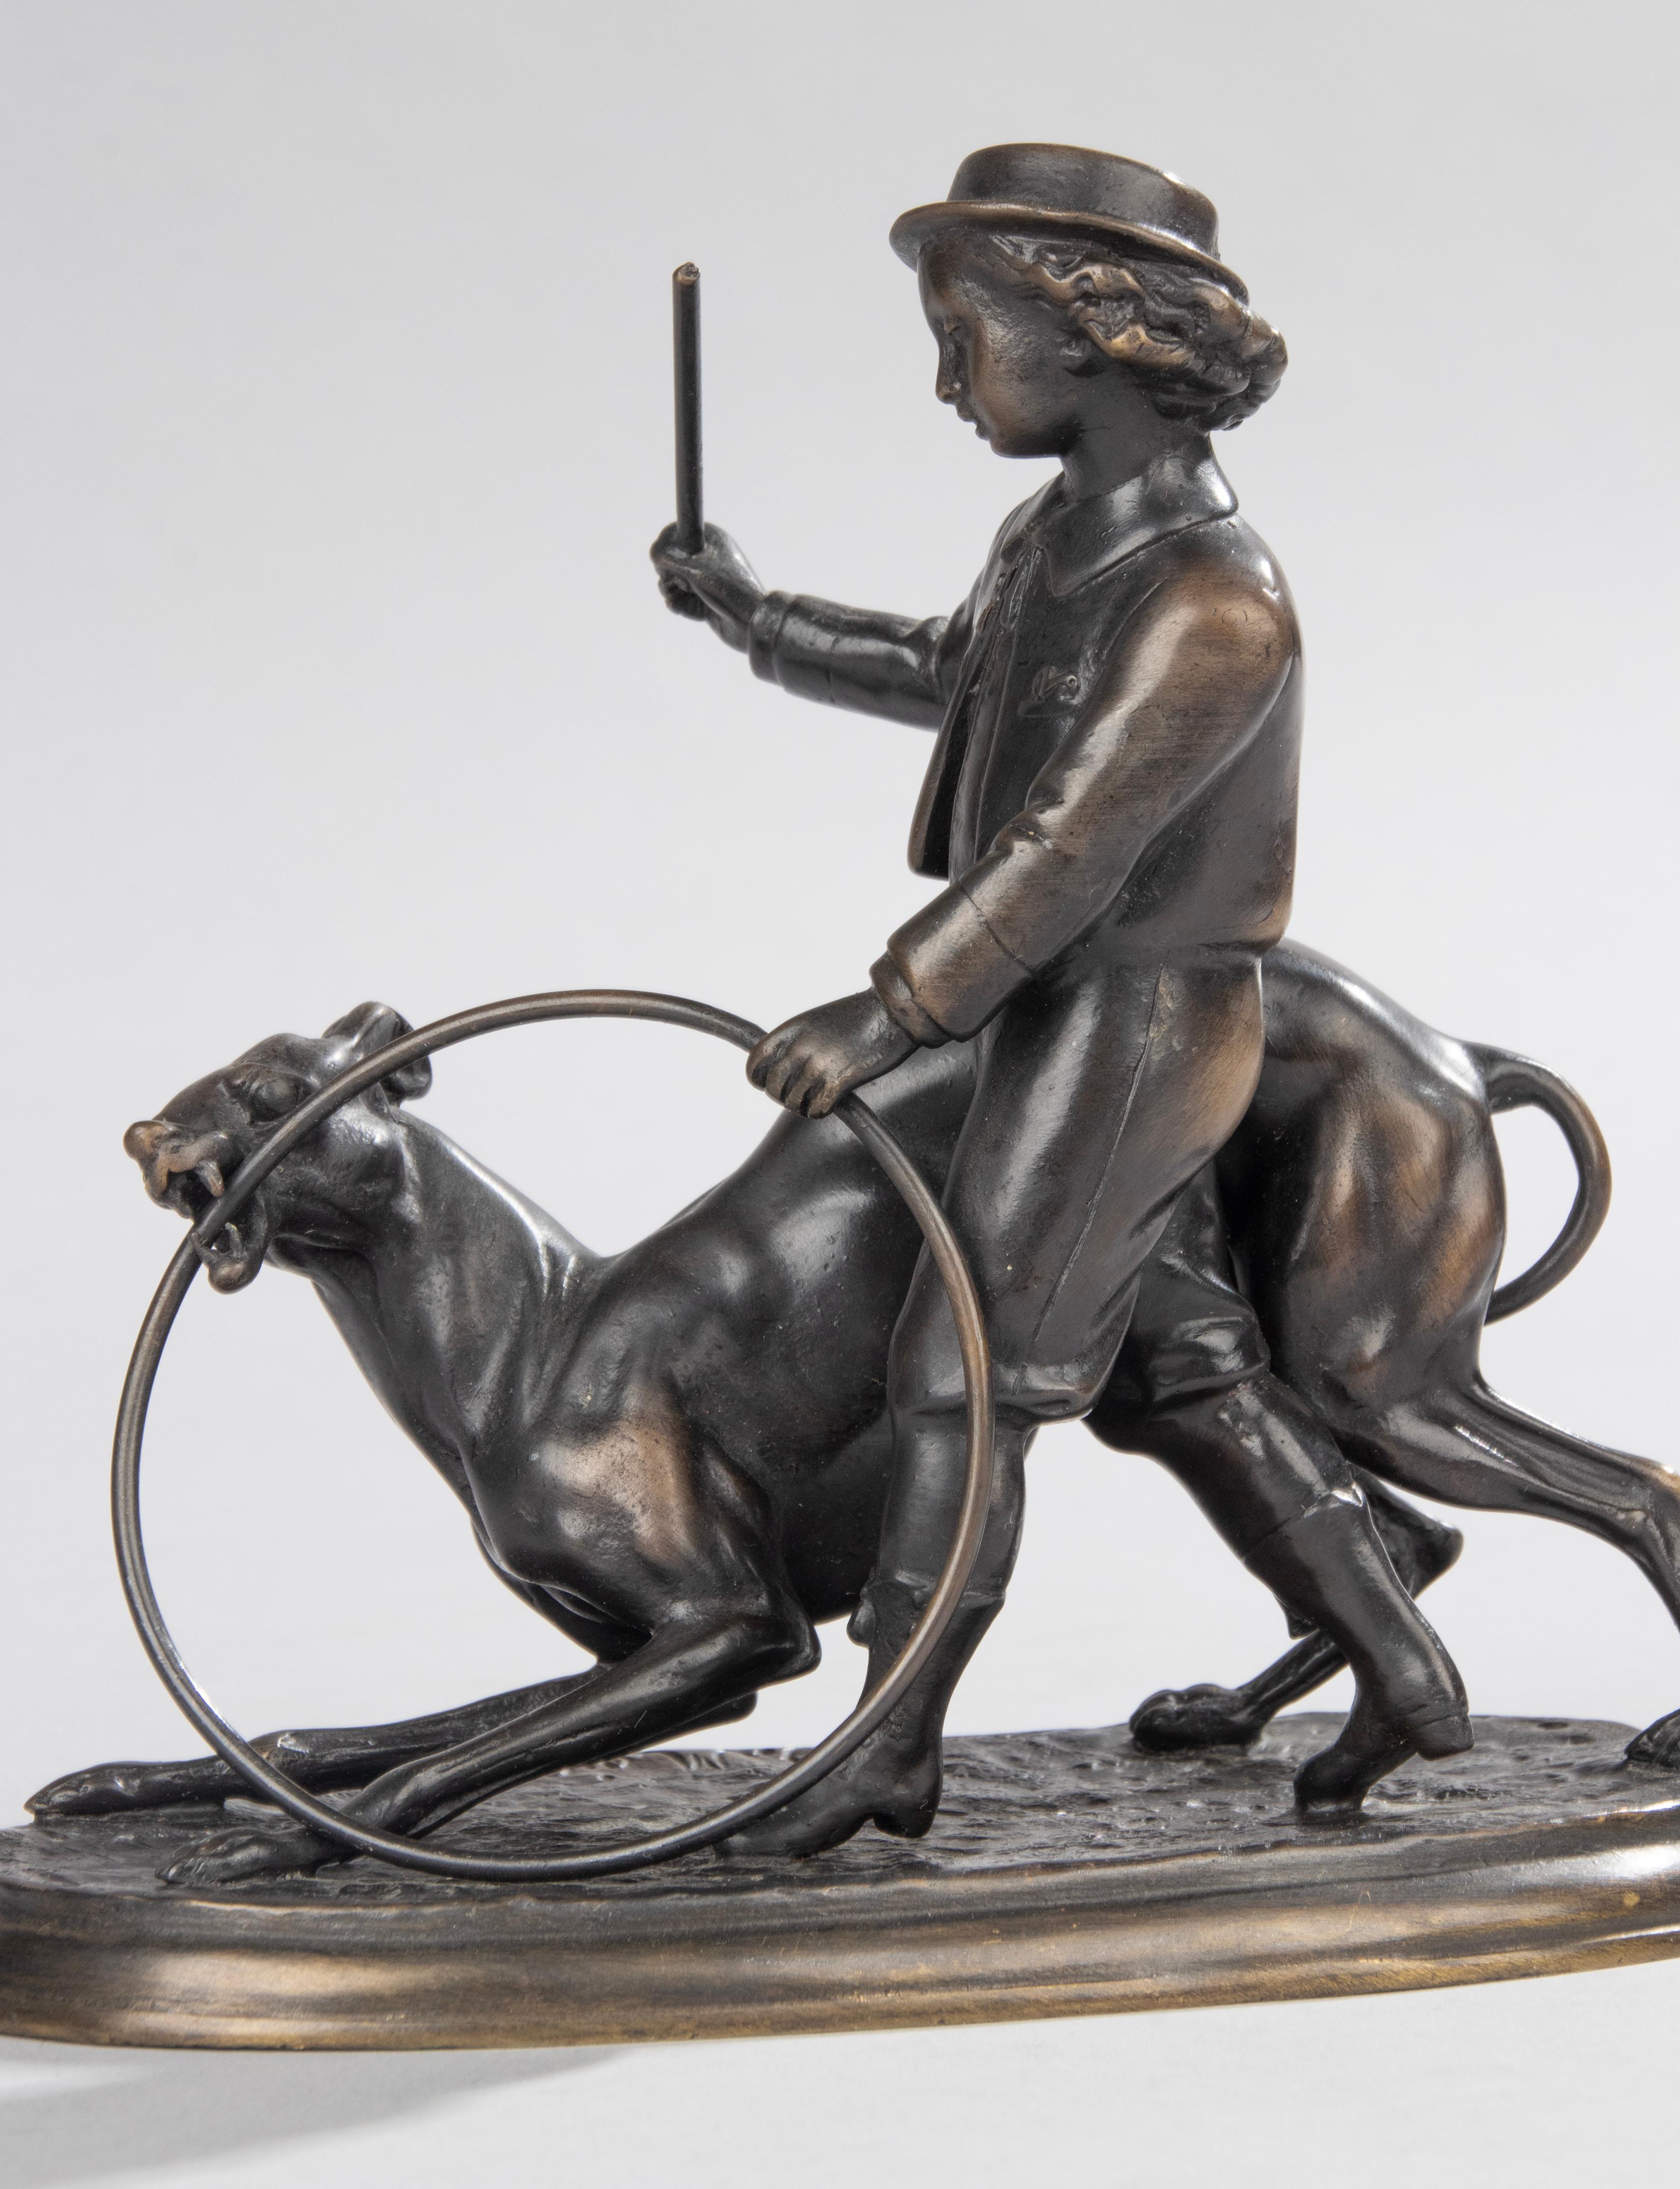 An antique refined bronze sculpture of boy playing with a hoop and a stick go with a Whippet/Greyhound dog. It has the original patina, signed on the base: Jules Moigniez. Made in France around 1870-1880.

Jules Moigniez (28 May 1835 – 29 May